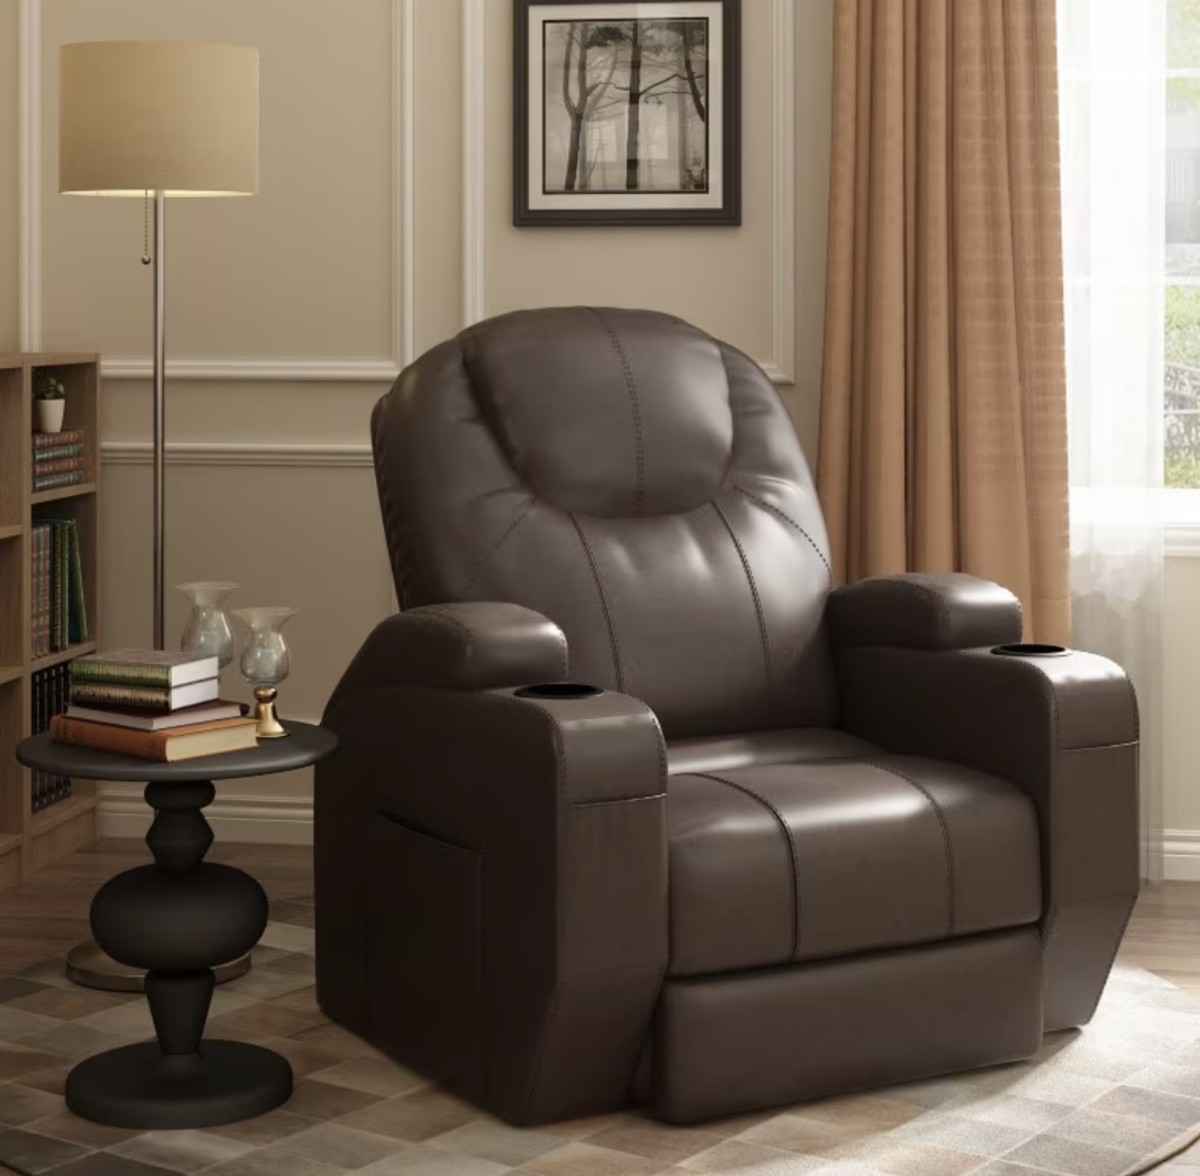 Get Comfortable With The FlexiSpot XL3 Power Lift Recliner Chair with Massage & Heat & Cup Holders